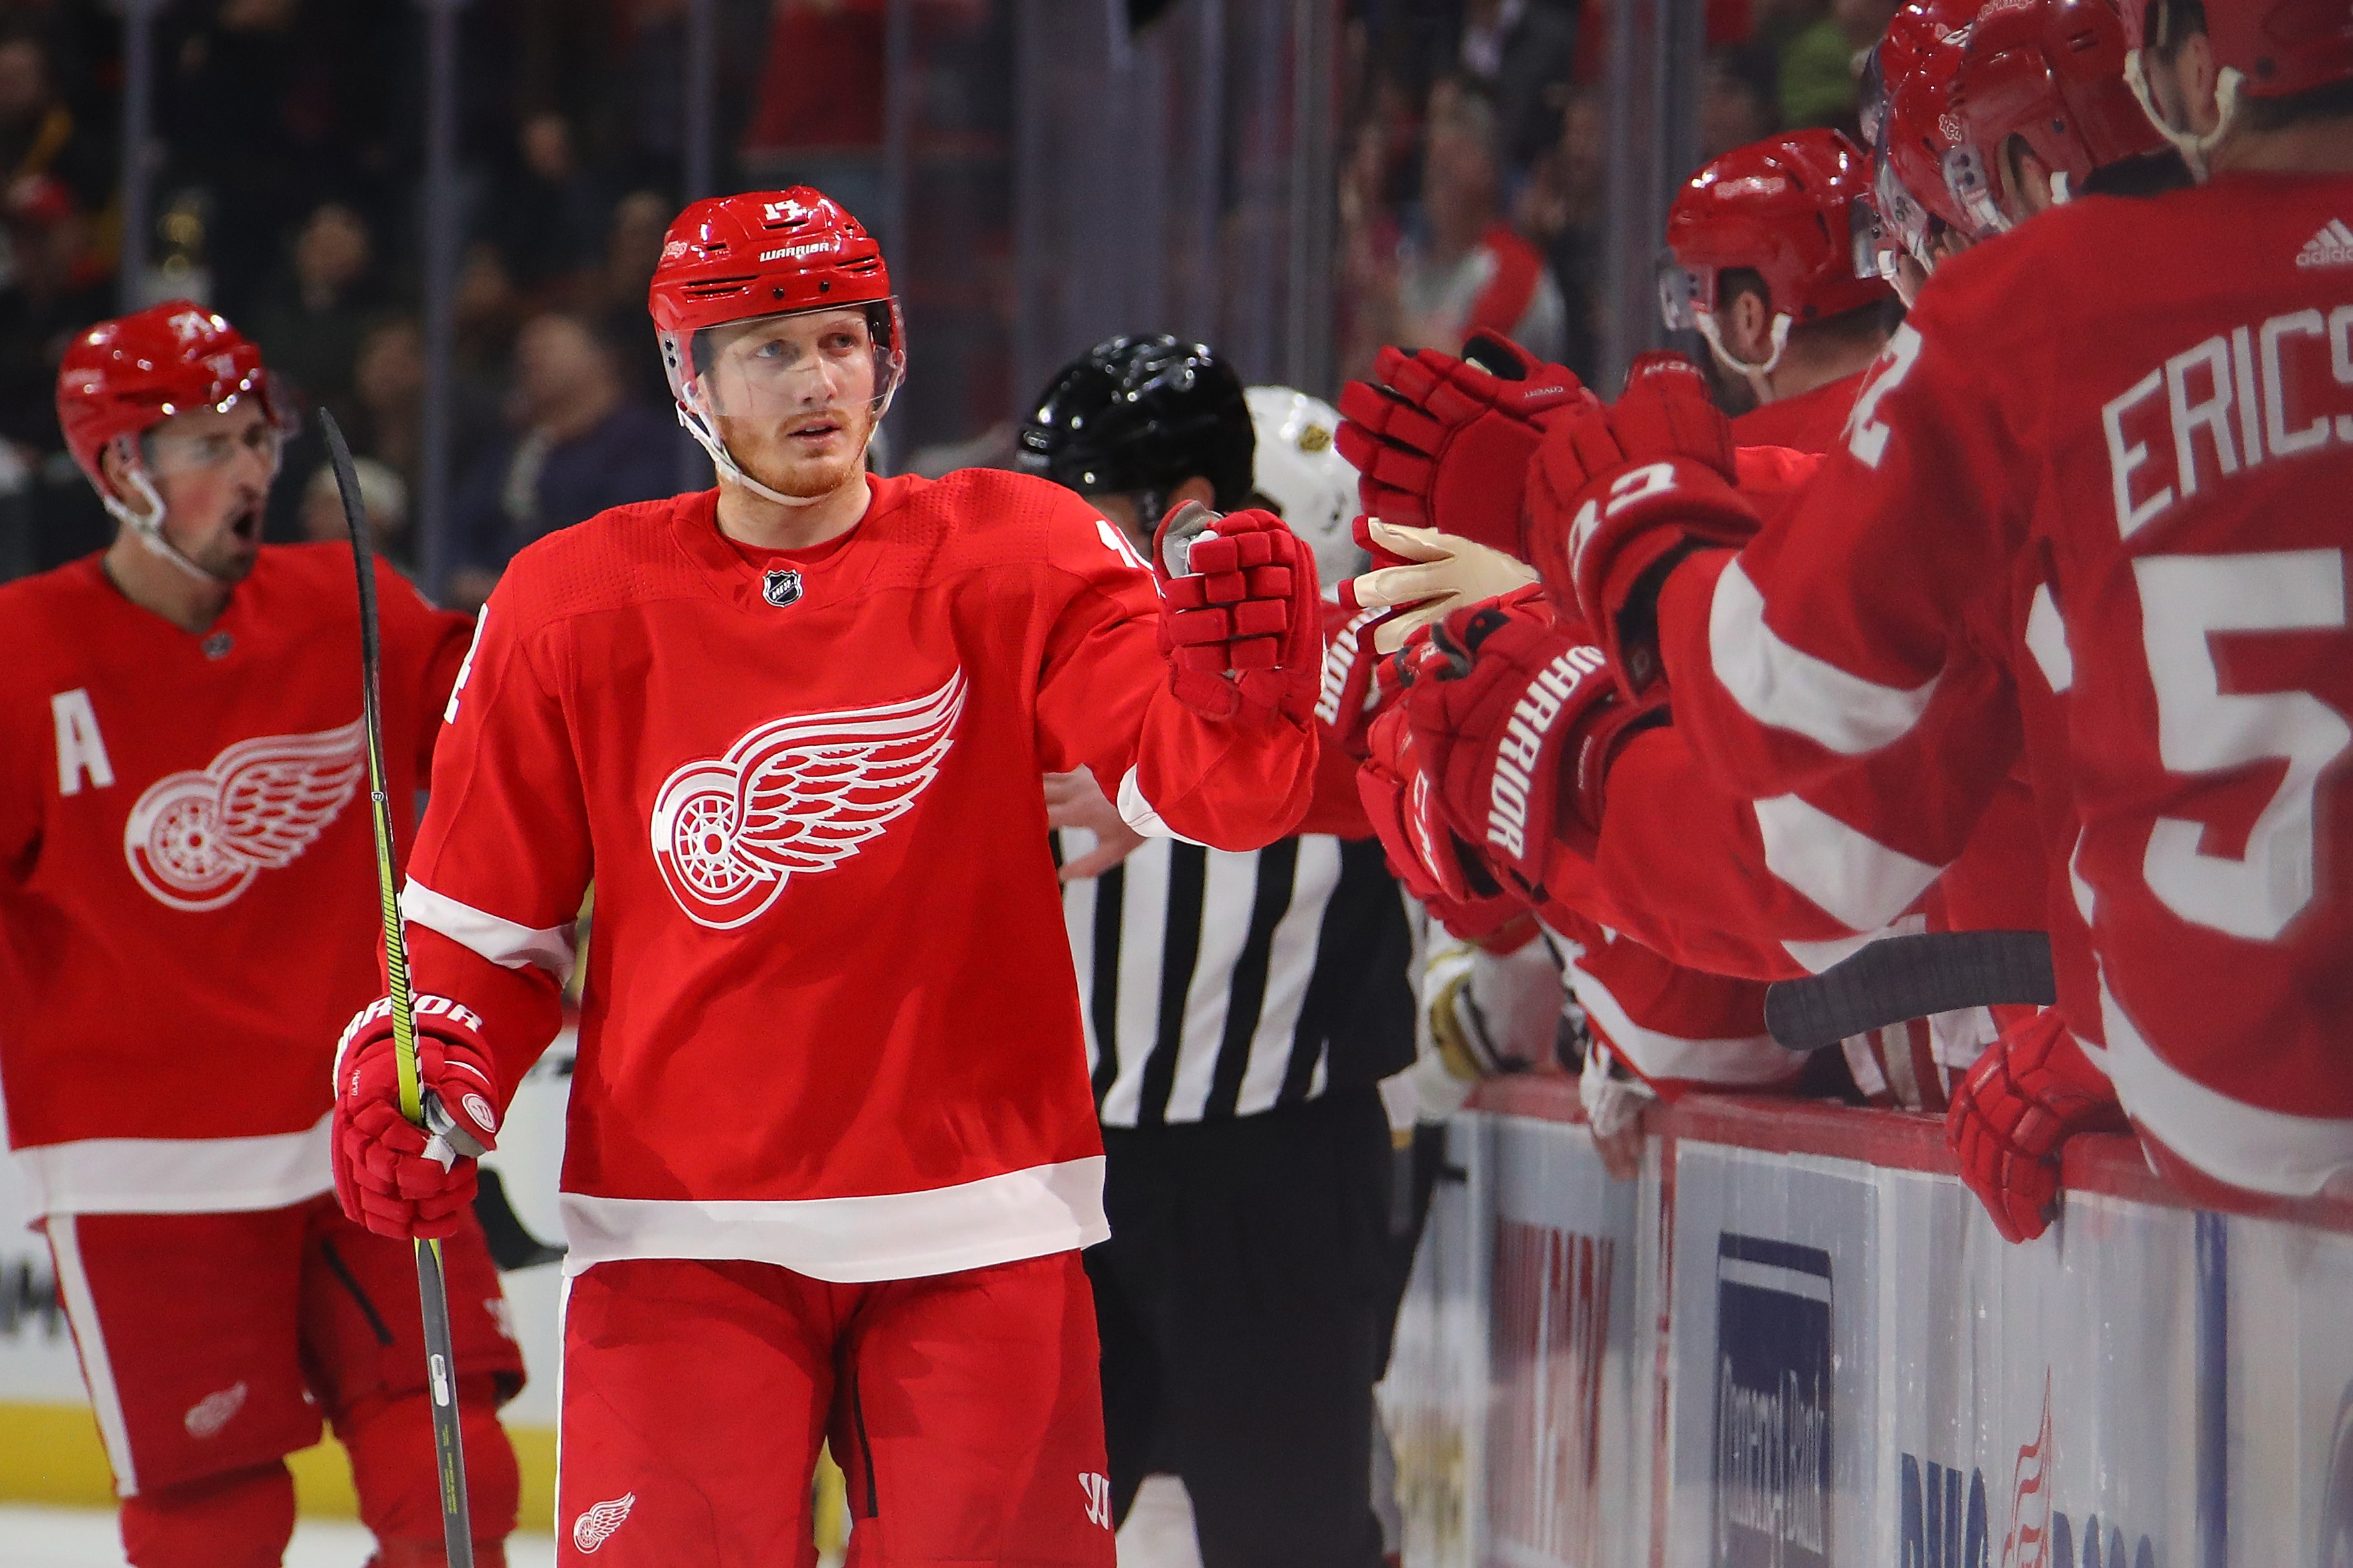 DETROIT, MICHIGAN - FEBRUARY 07: Gustav Nyquist #14 of the Detroit Red Wings celebrates his first period goal with teammates while playing the Vegas Golden Knights at Little Caesars Arena on February 07, 2019 in Detroit, Michigan.